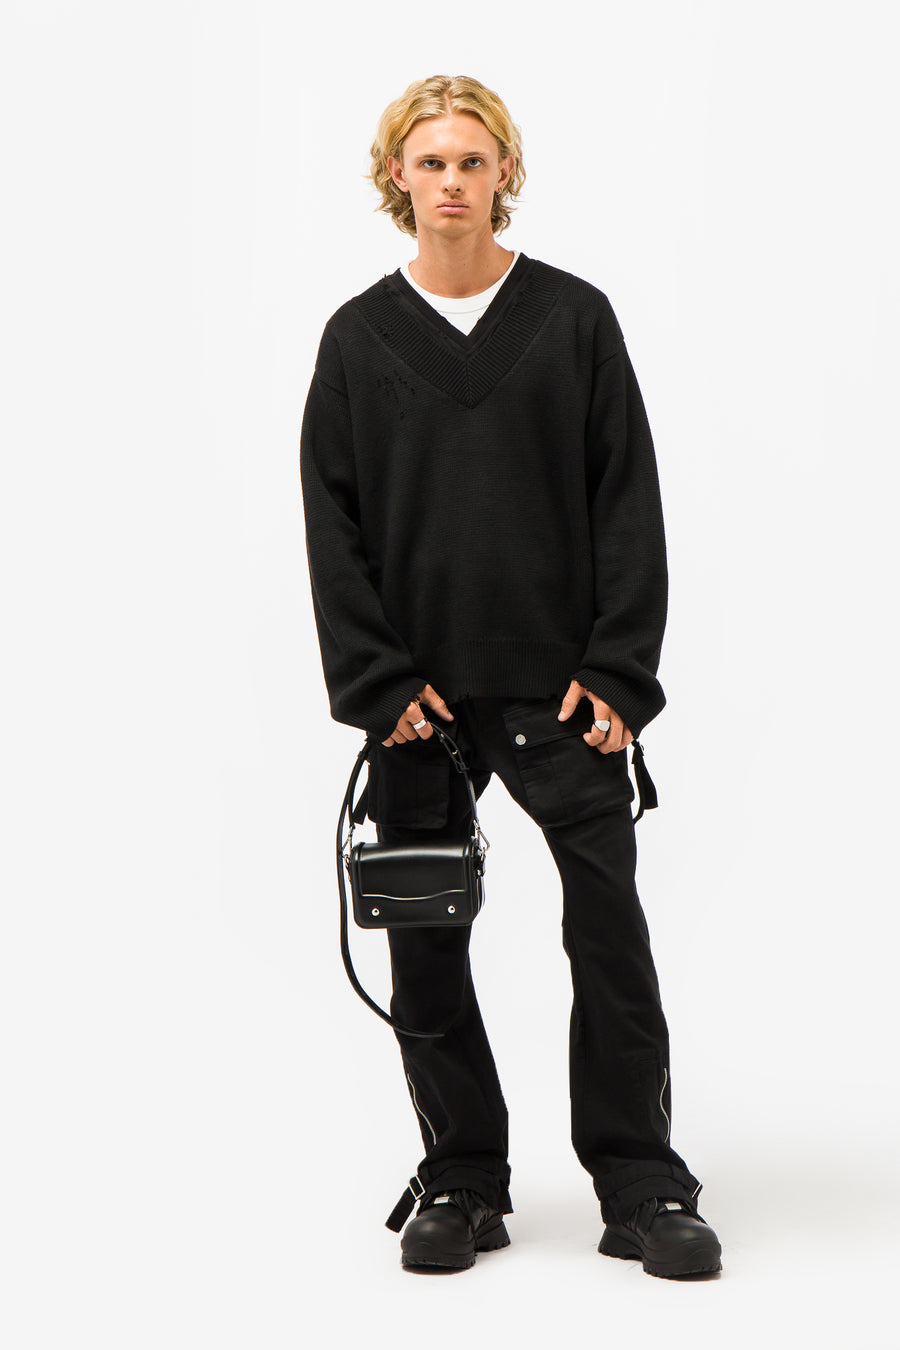 C2H4 - Men's Distressed Knit Layered Sweater in Black